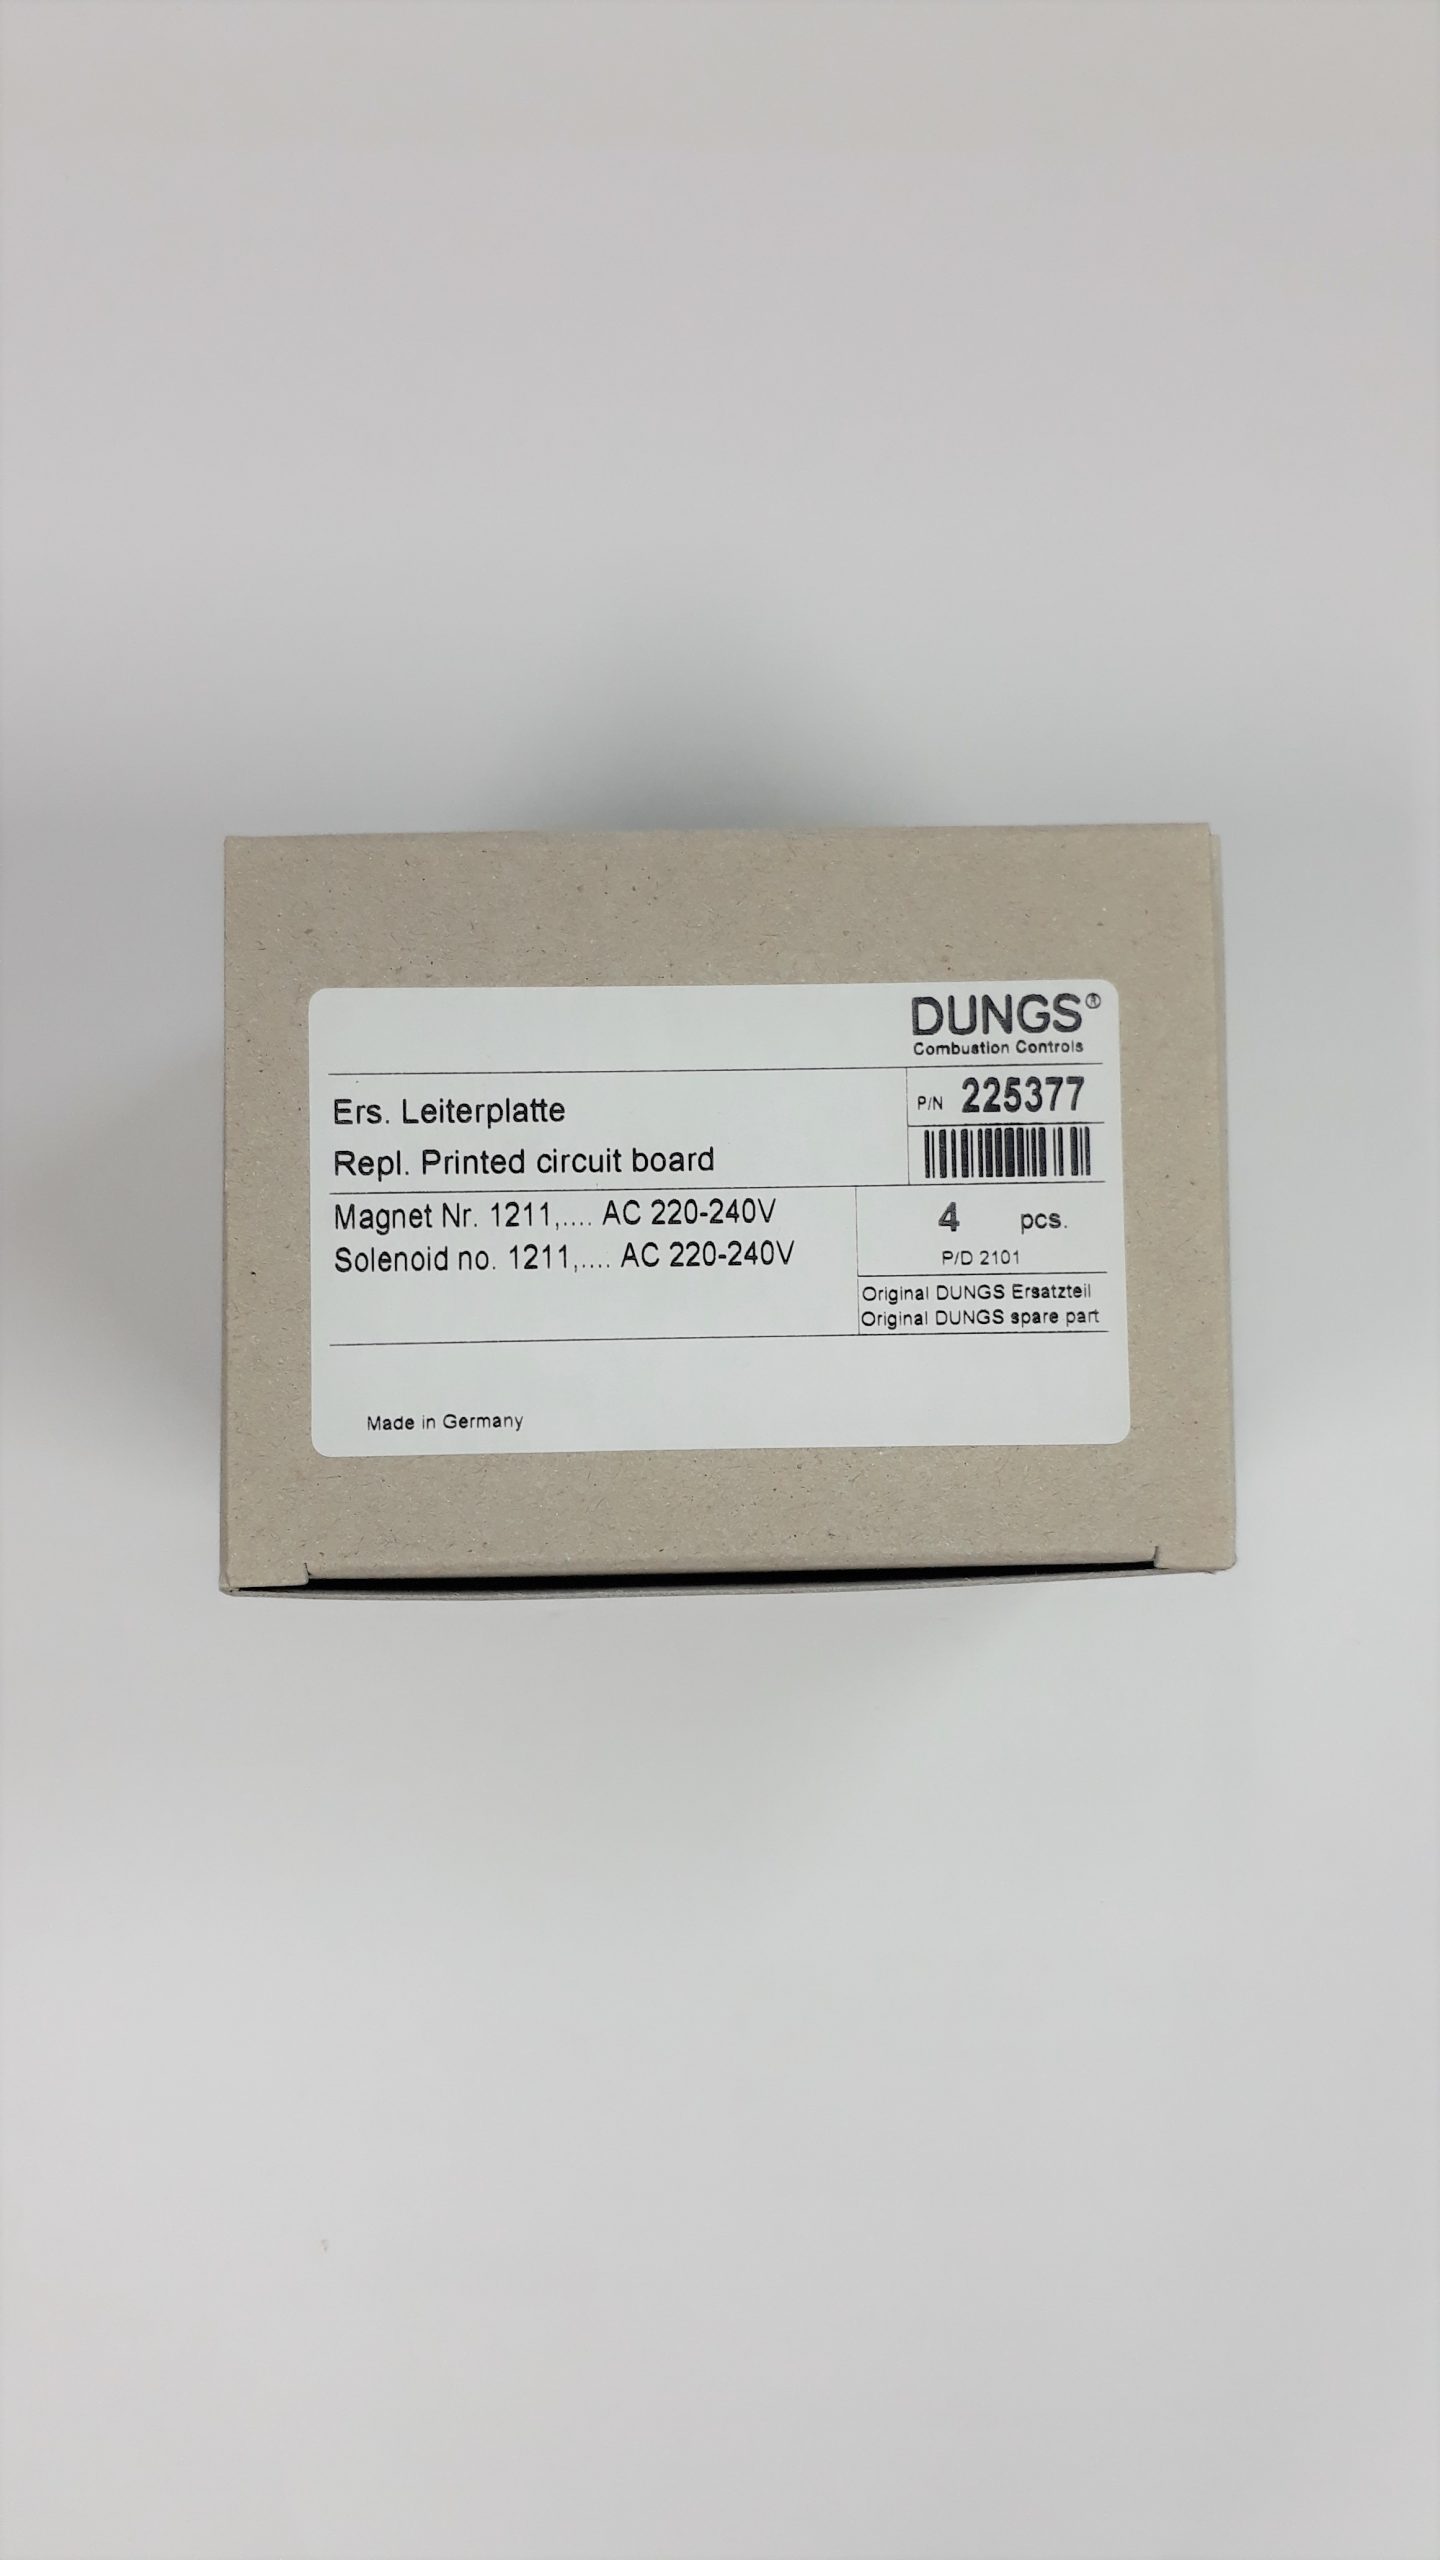 Part No: DU-225377, PCB Card for Dungs Coil Nr. 1211, 1212, 1411